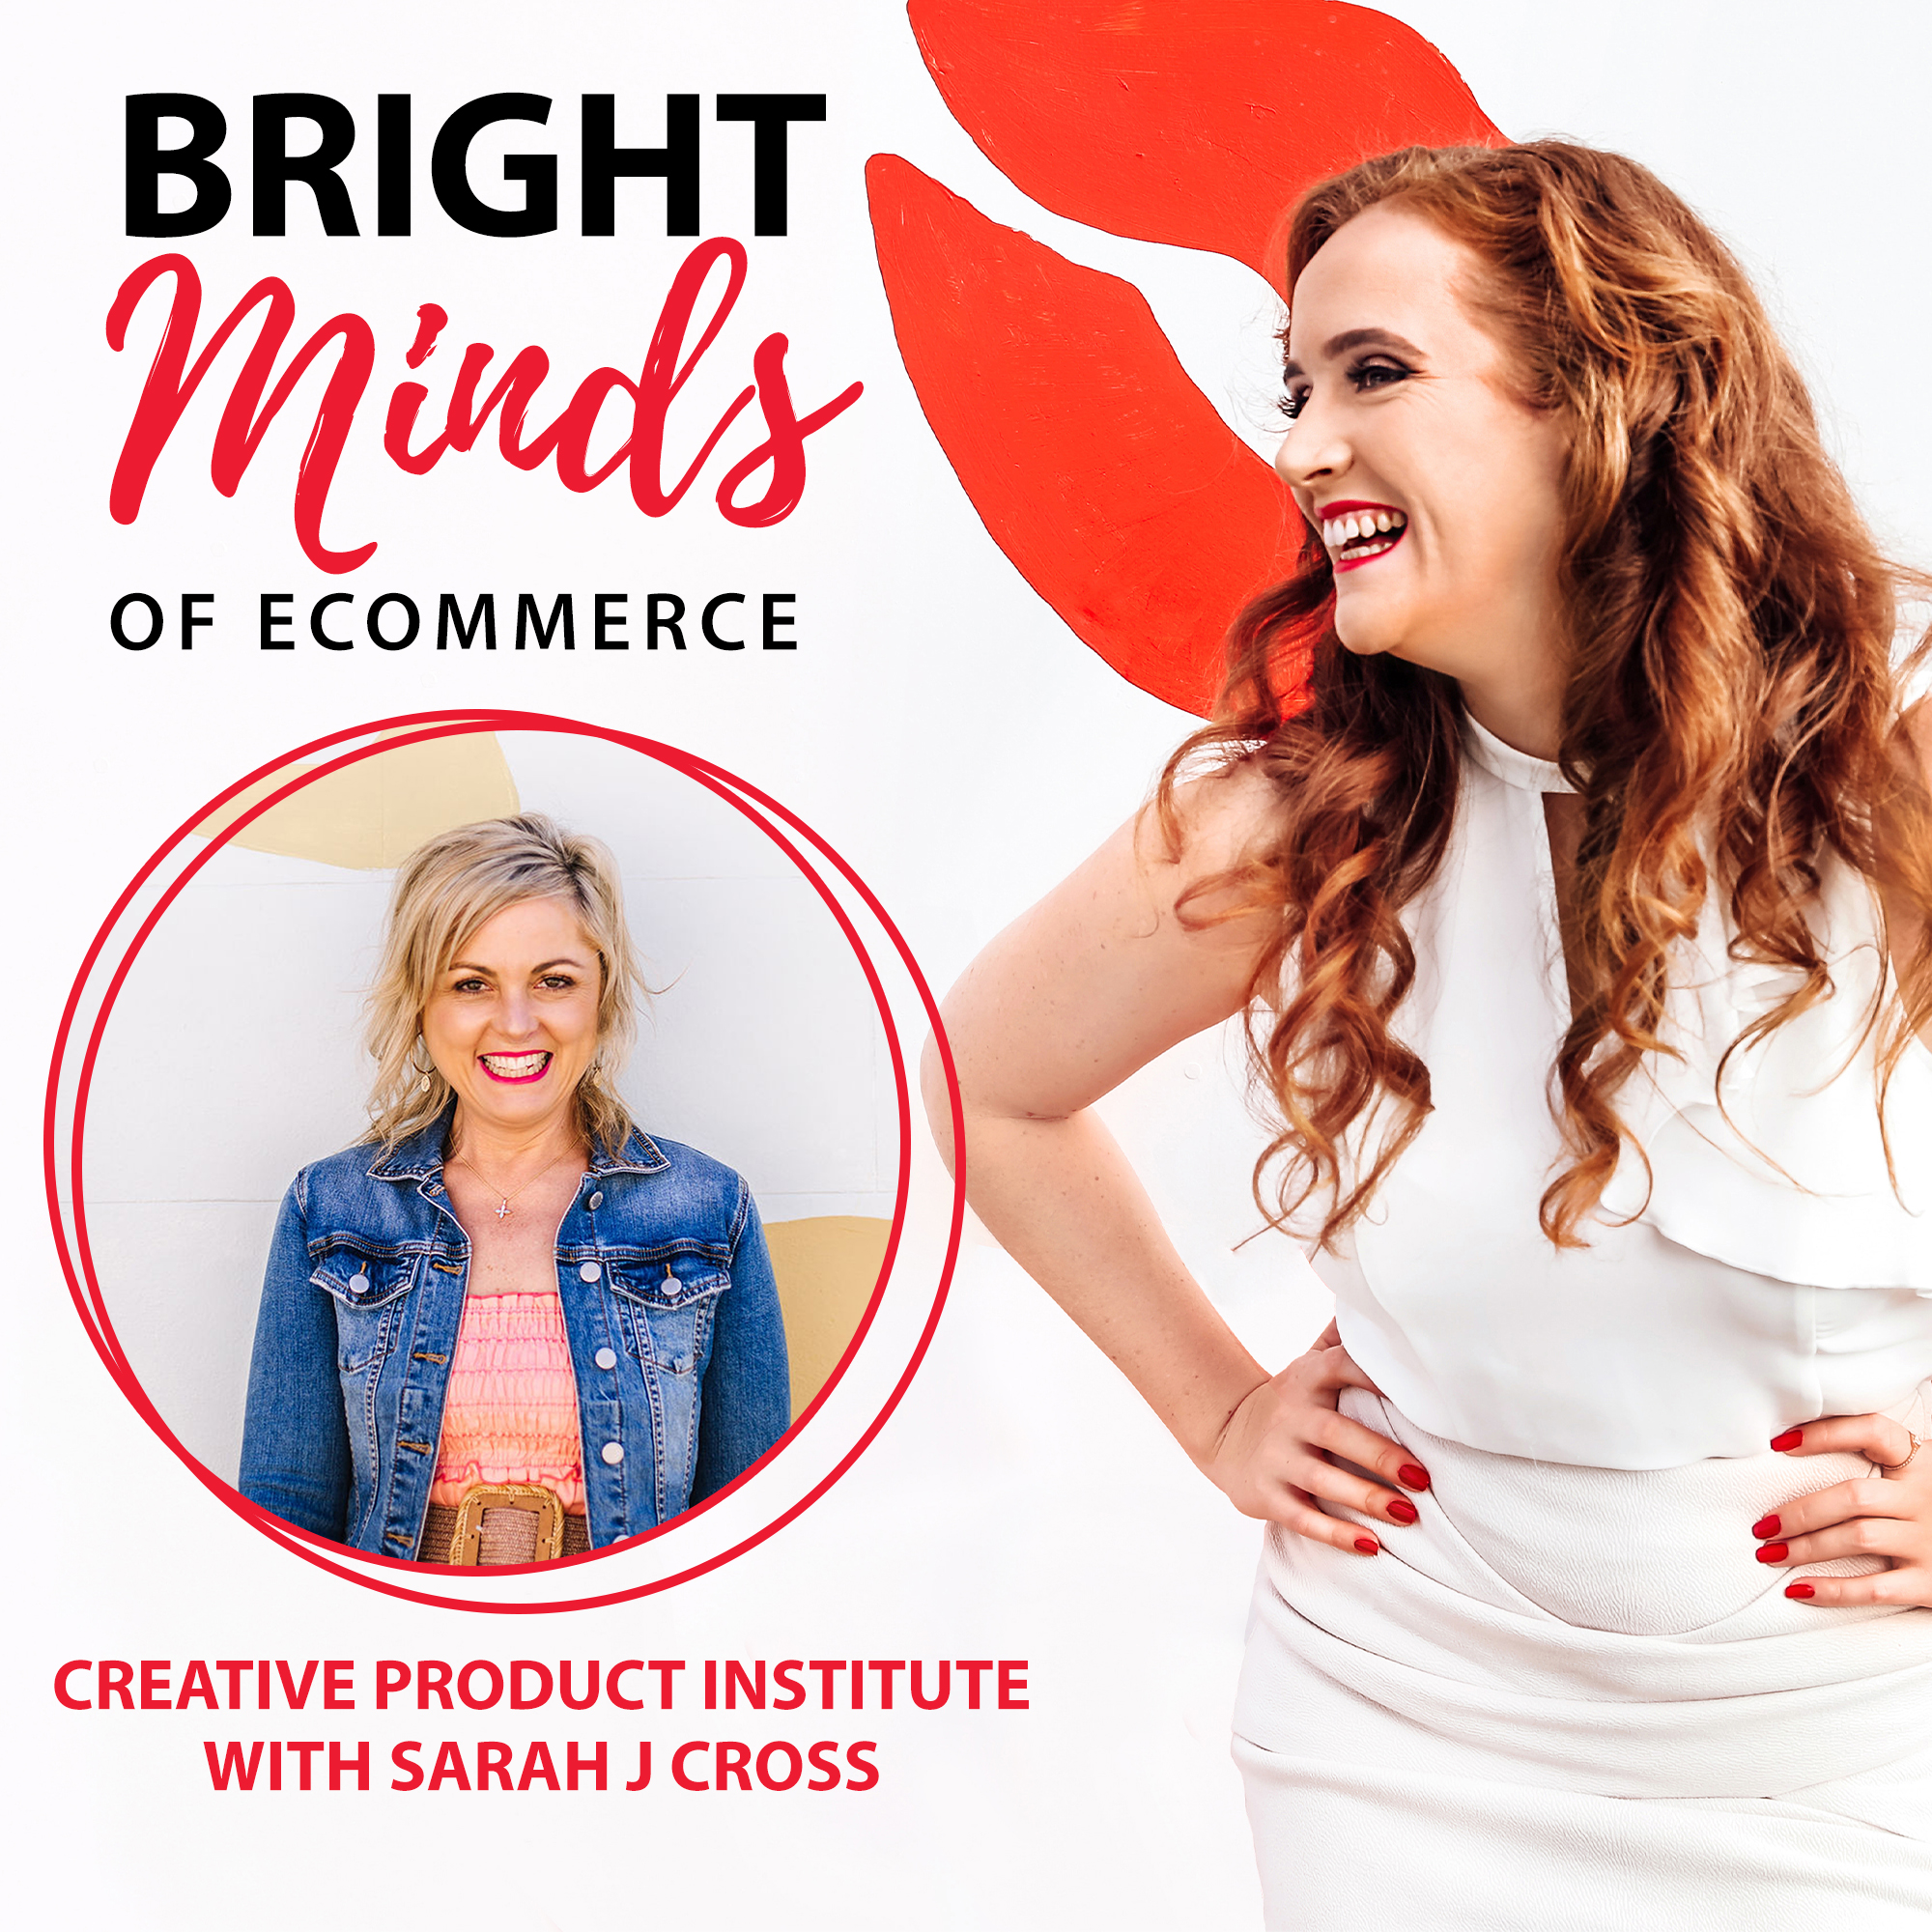 Wholesaling for greater profit with Sarah J Cross from the Creative Product Institute